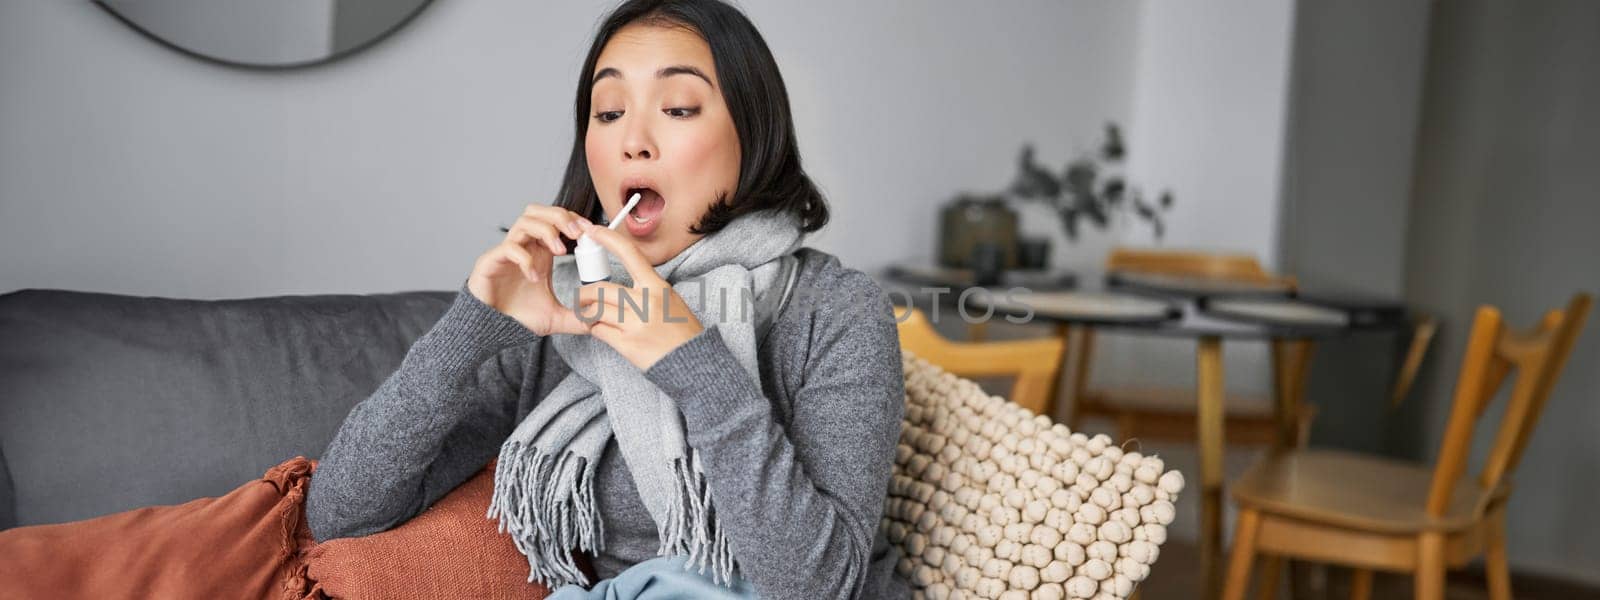 Ill woman using spray from sore throat, treating her cold or flu, staying at home on sick leave, sitting on sofa in living room.